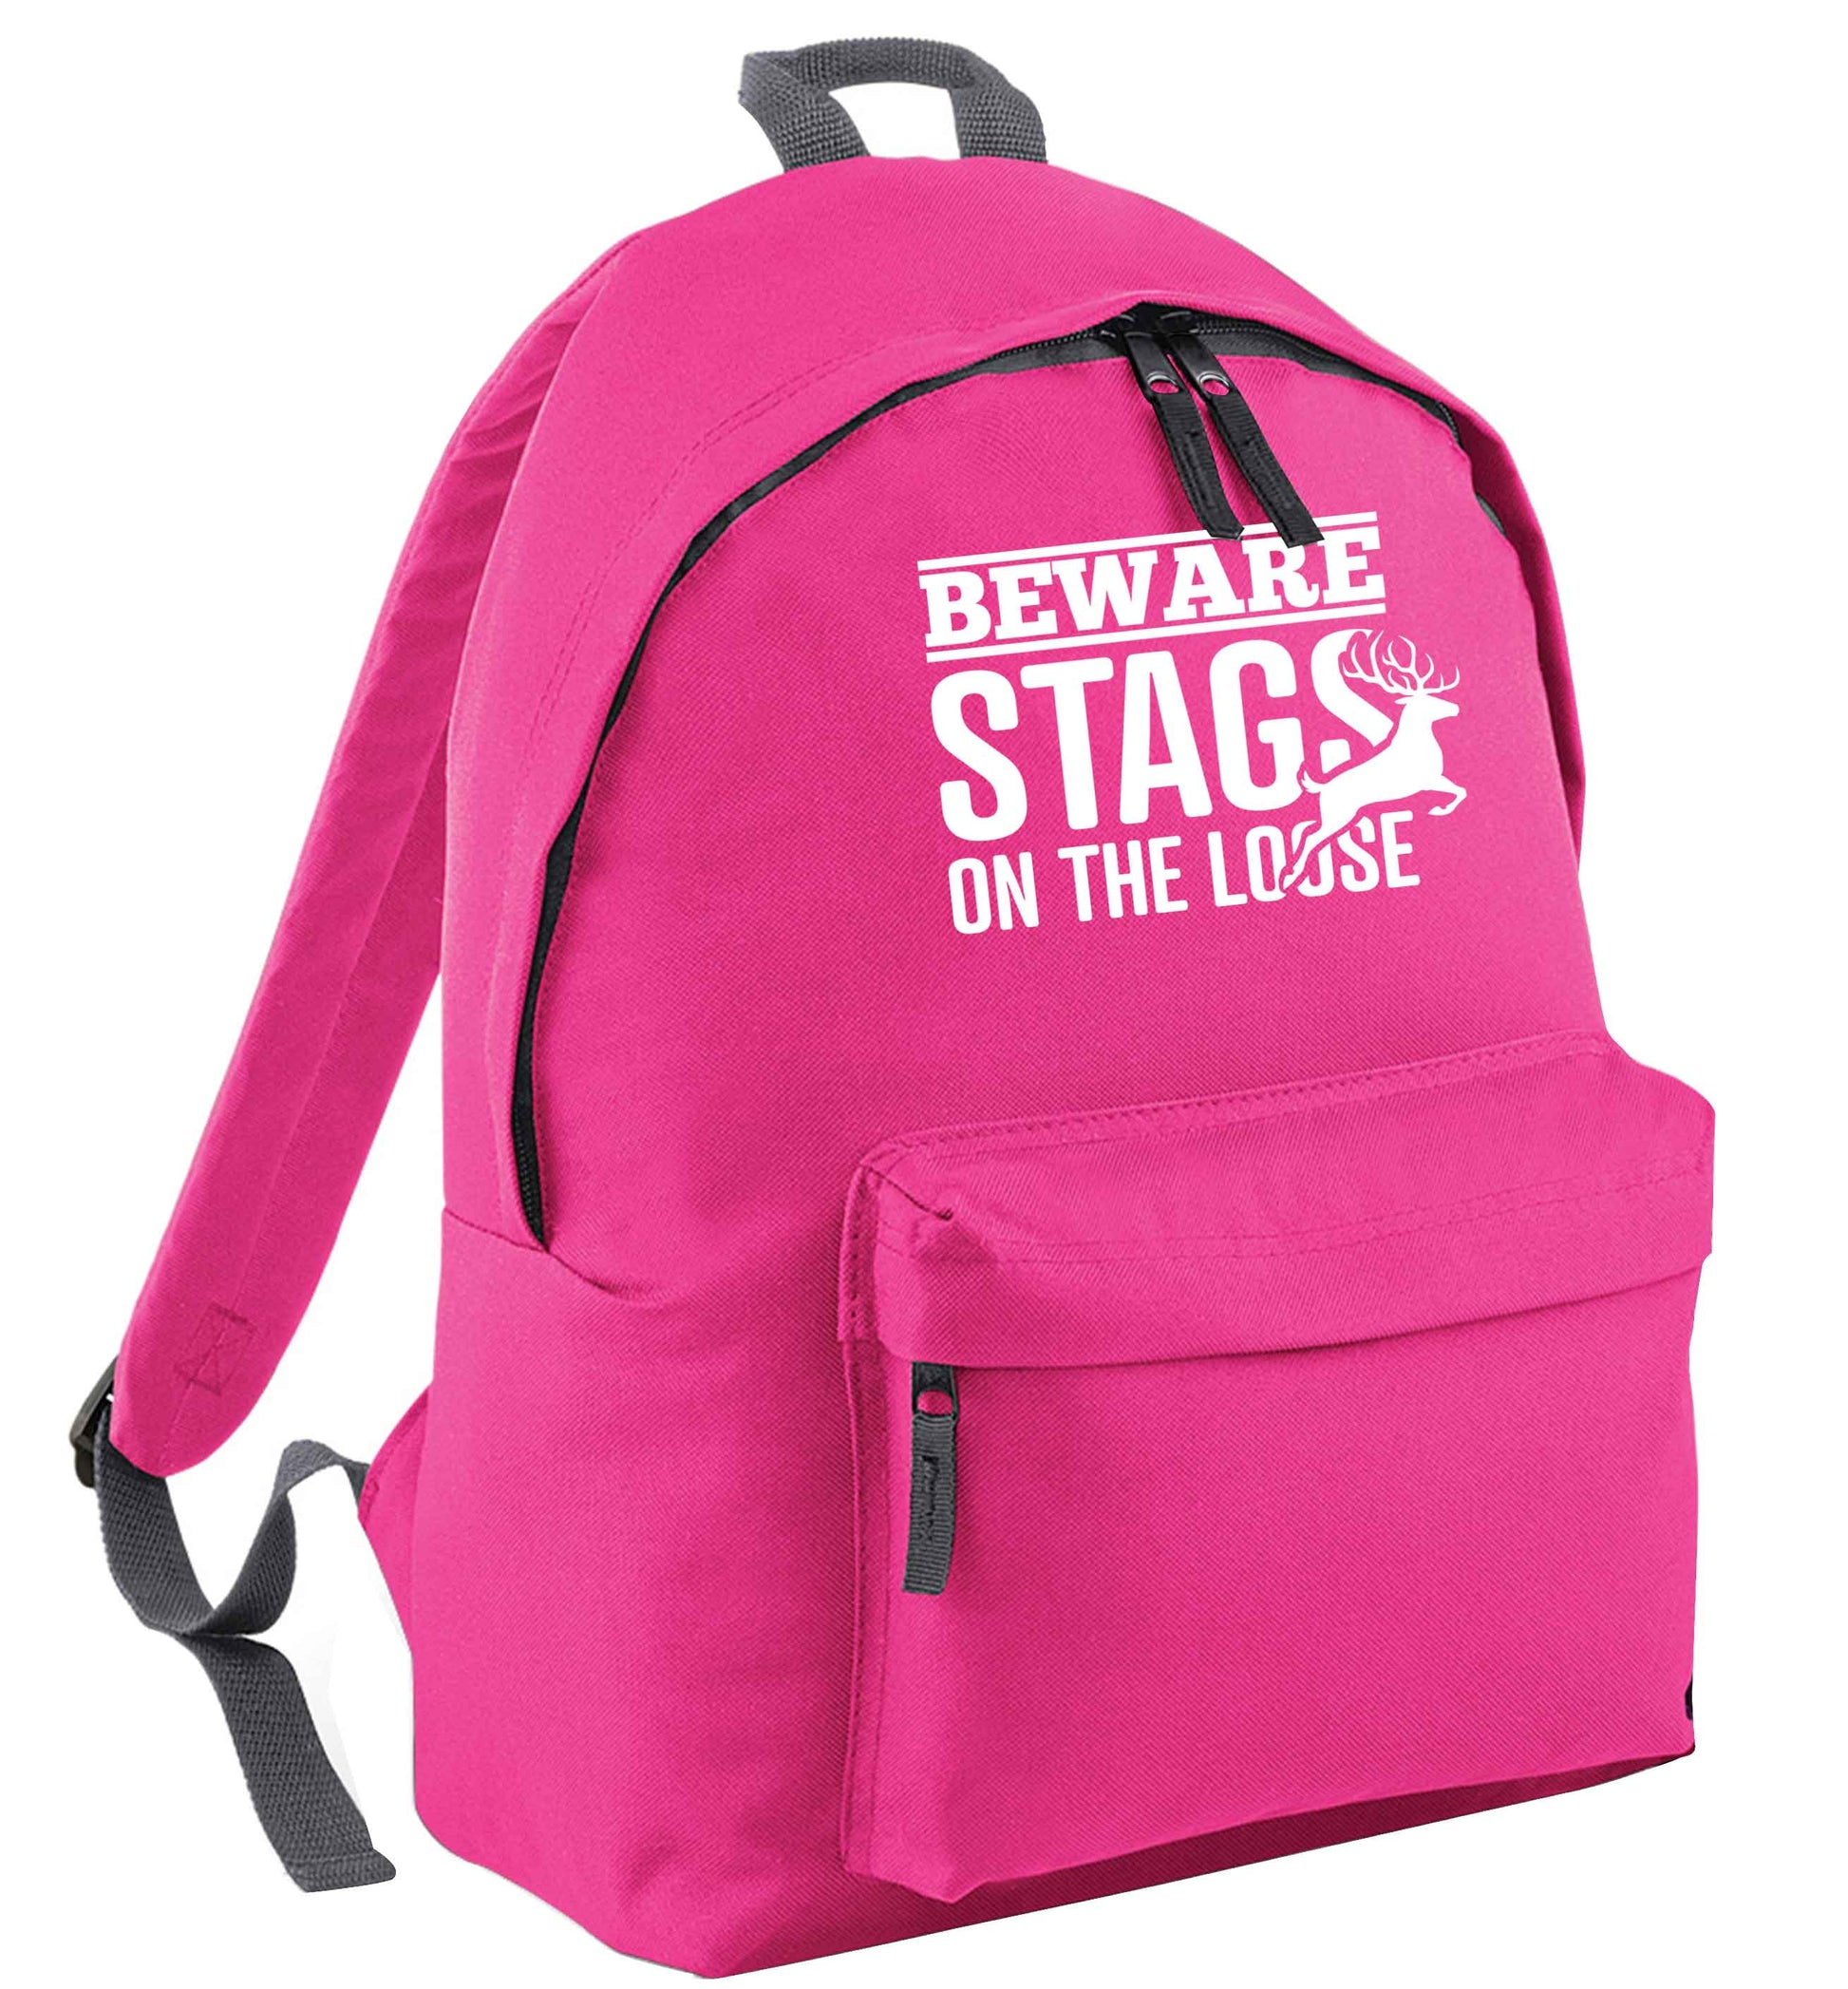 Beware stags on the loose pink adults backpack